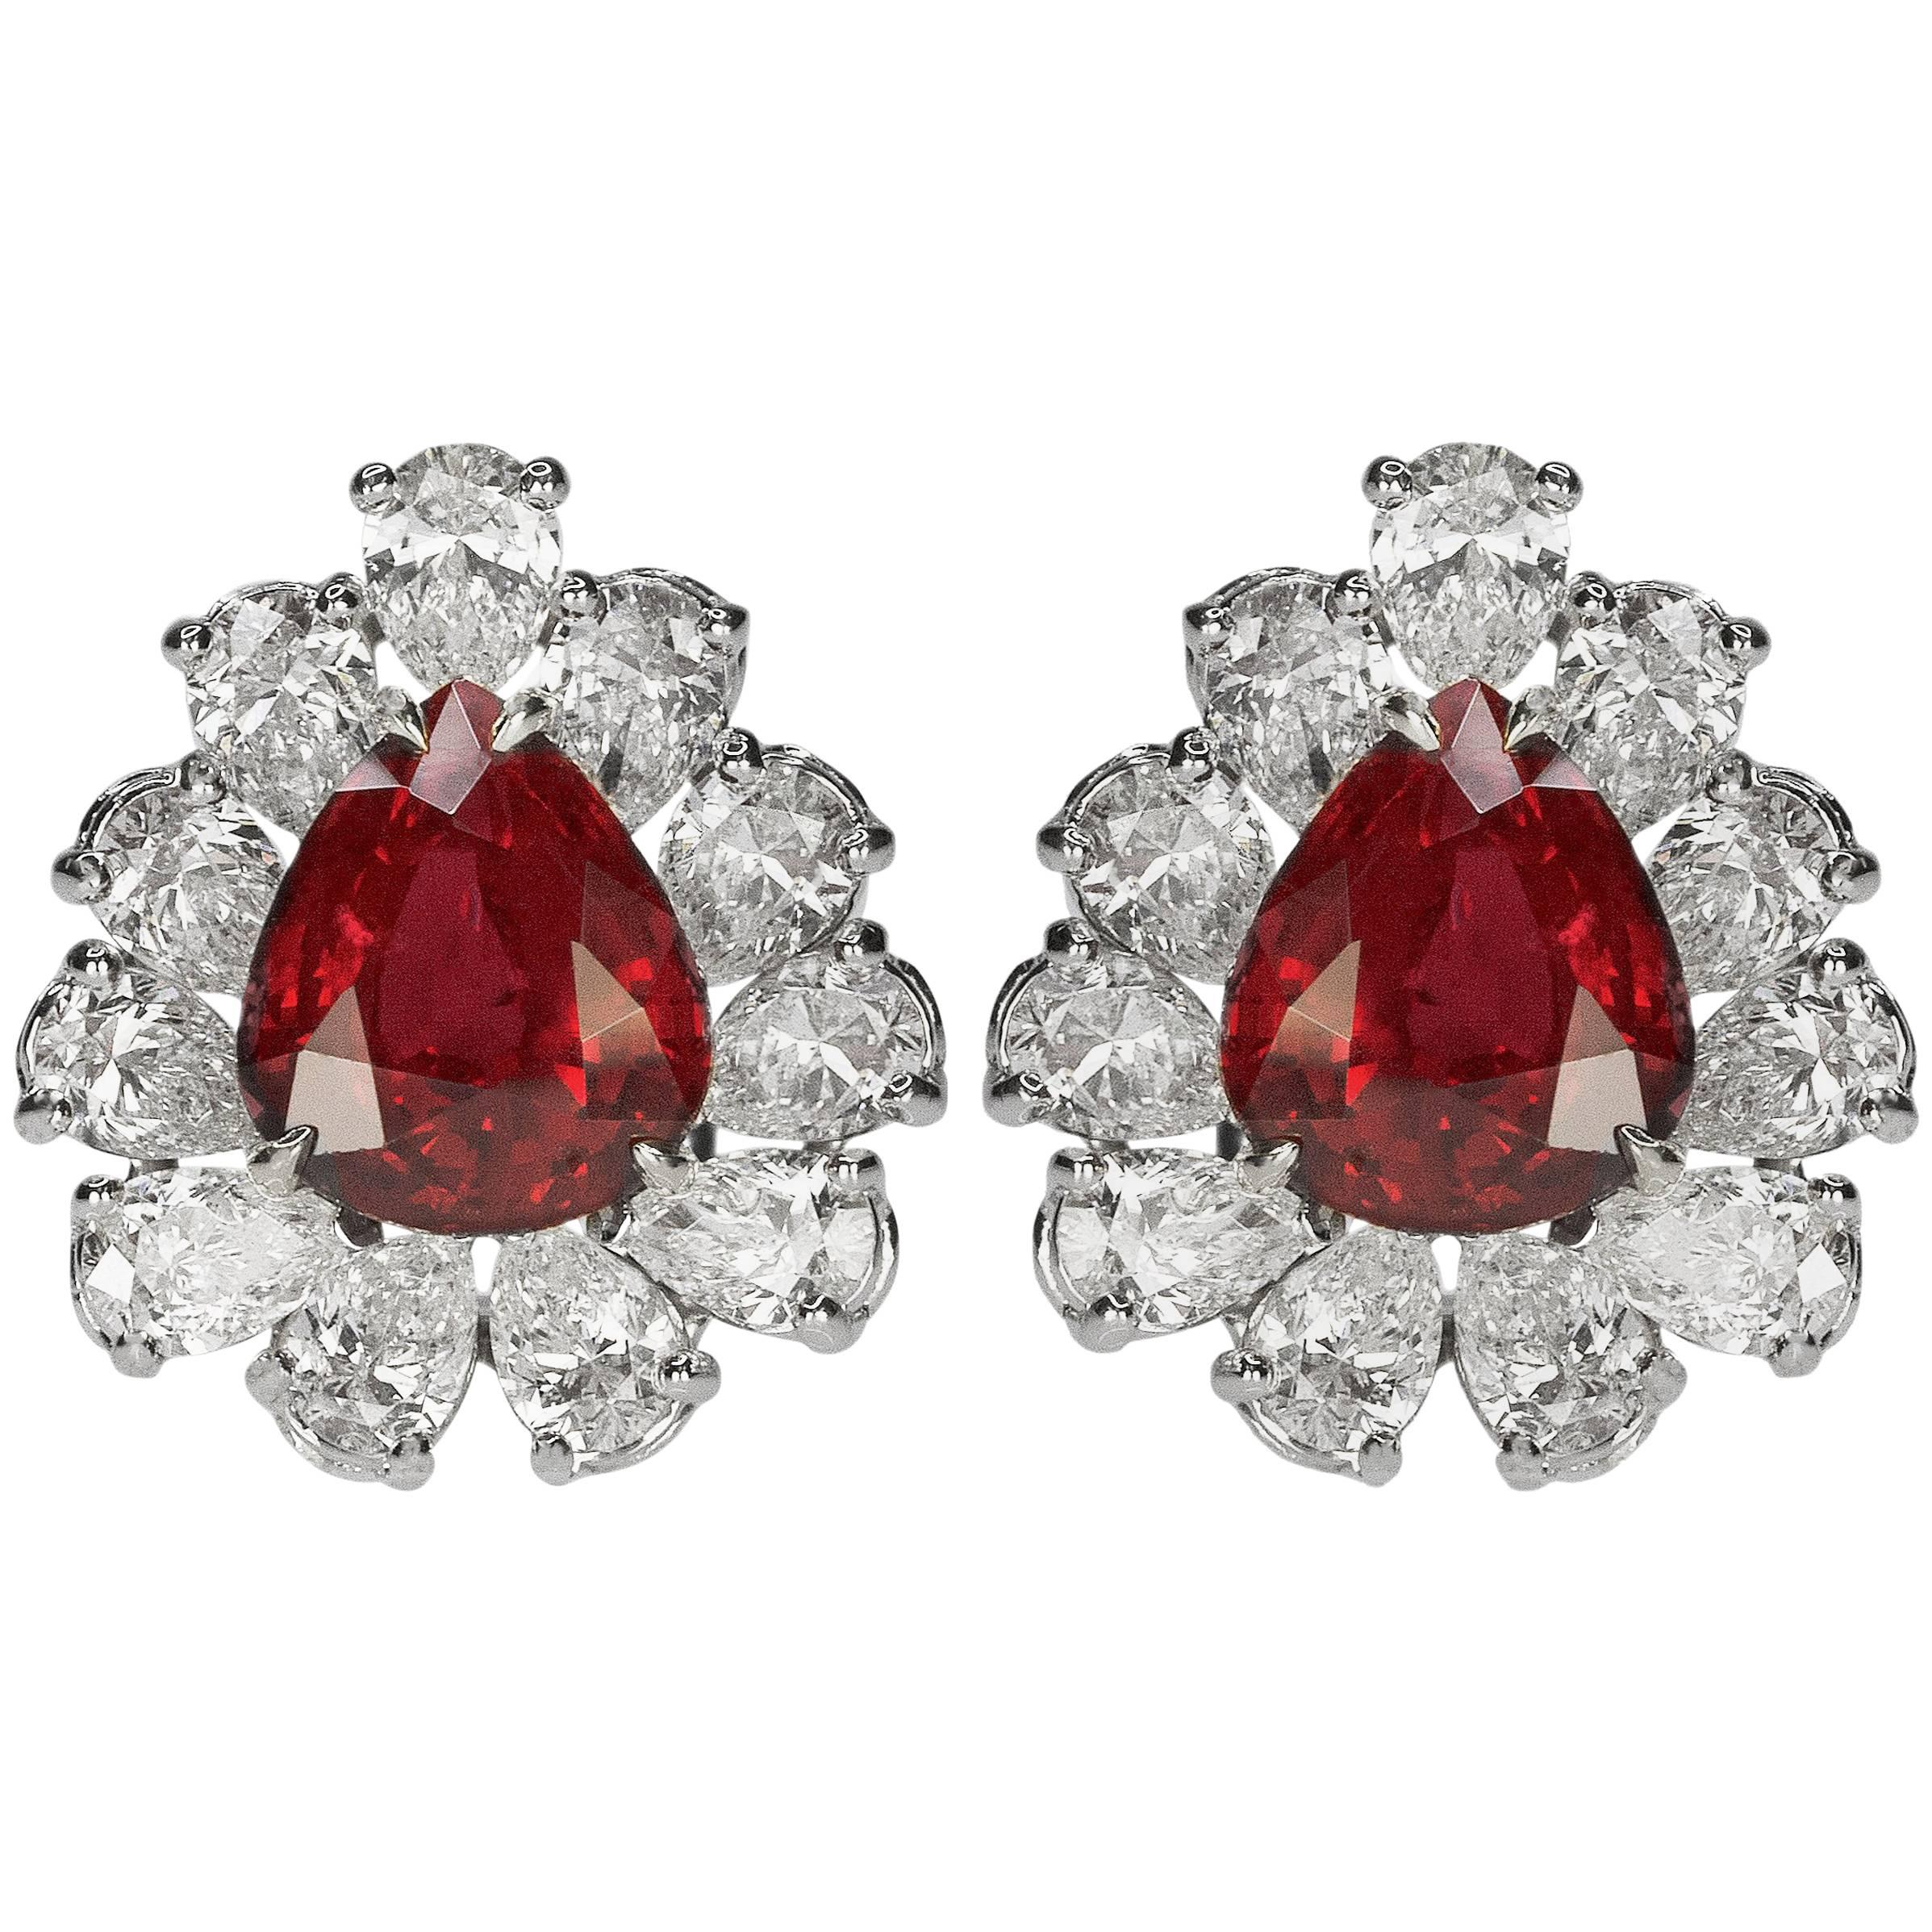 Fabulous Ruby and Diamond Earrings in Platinum